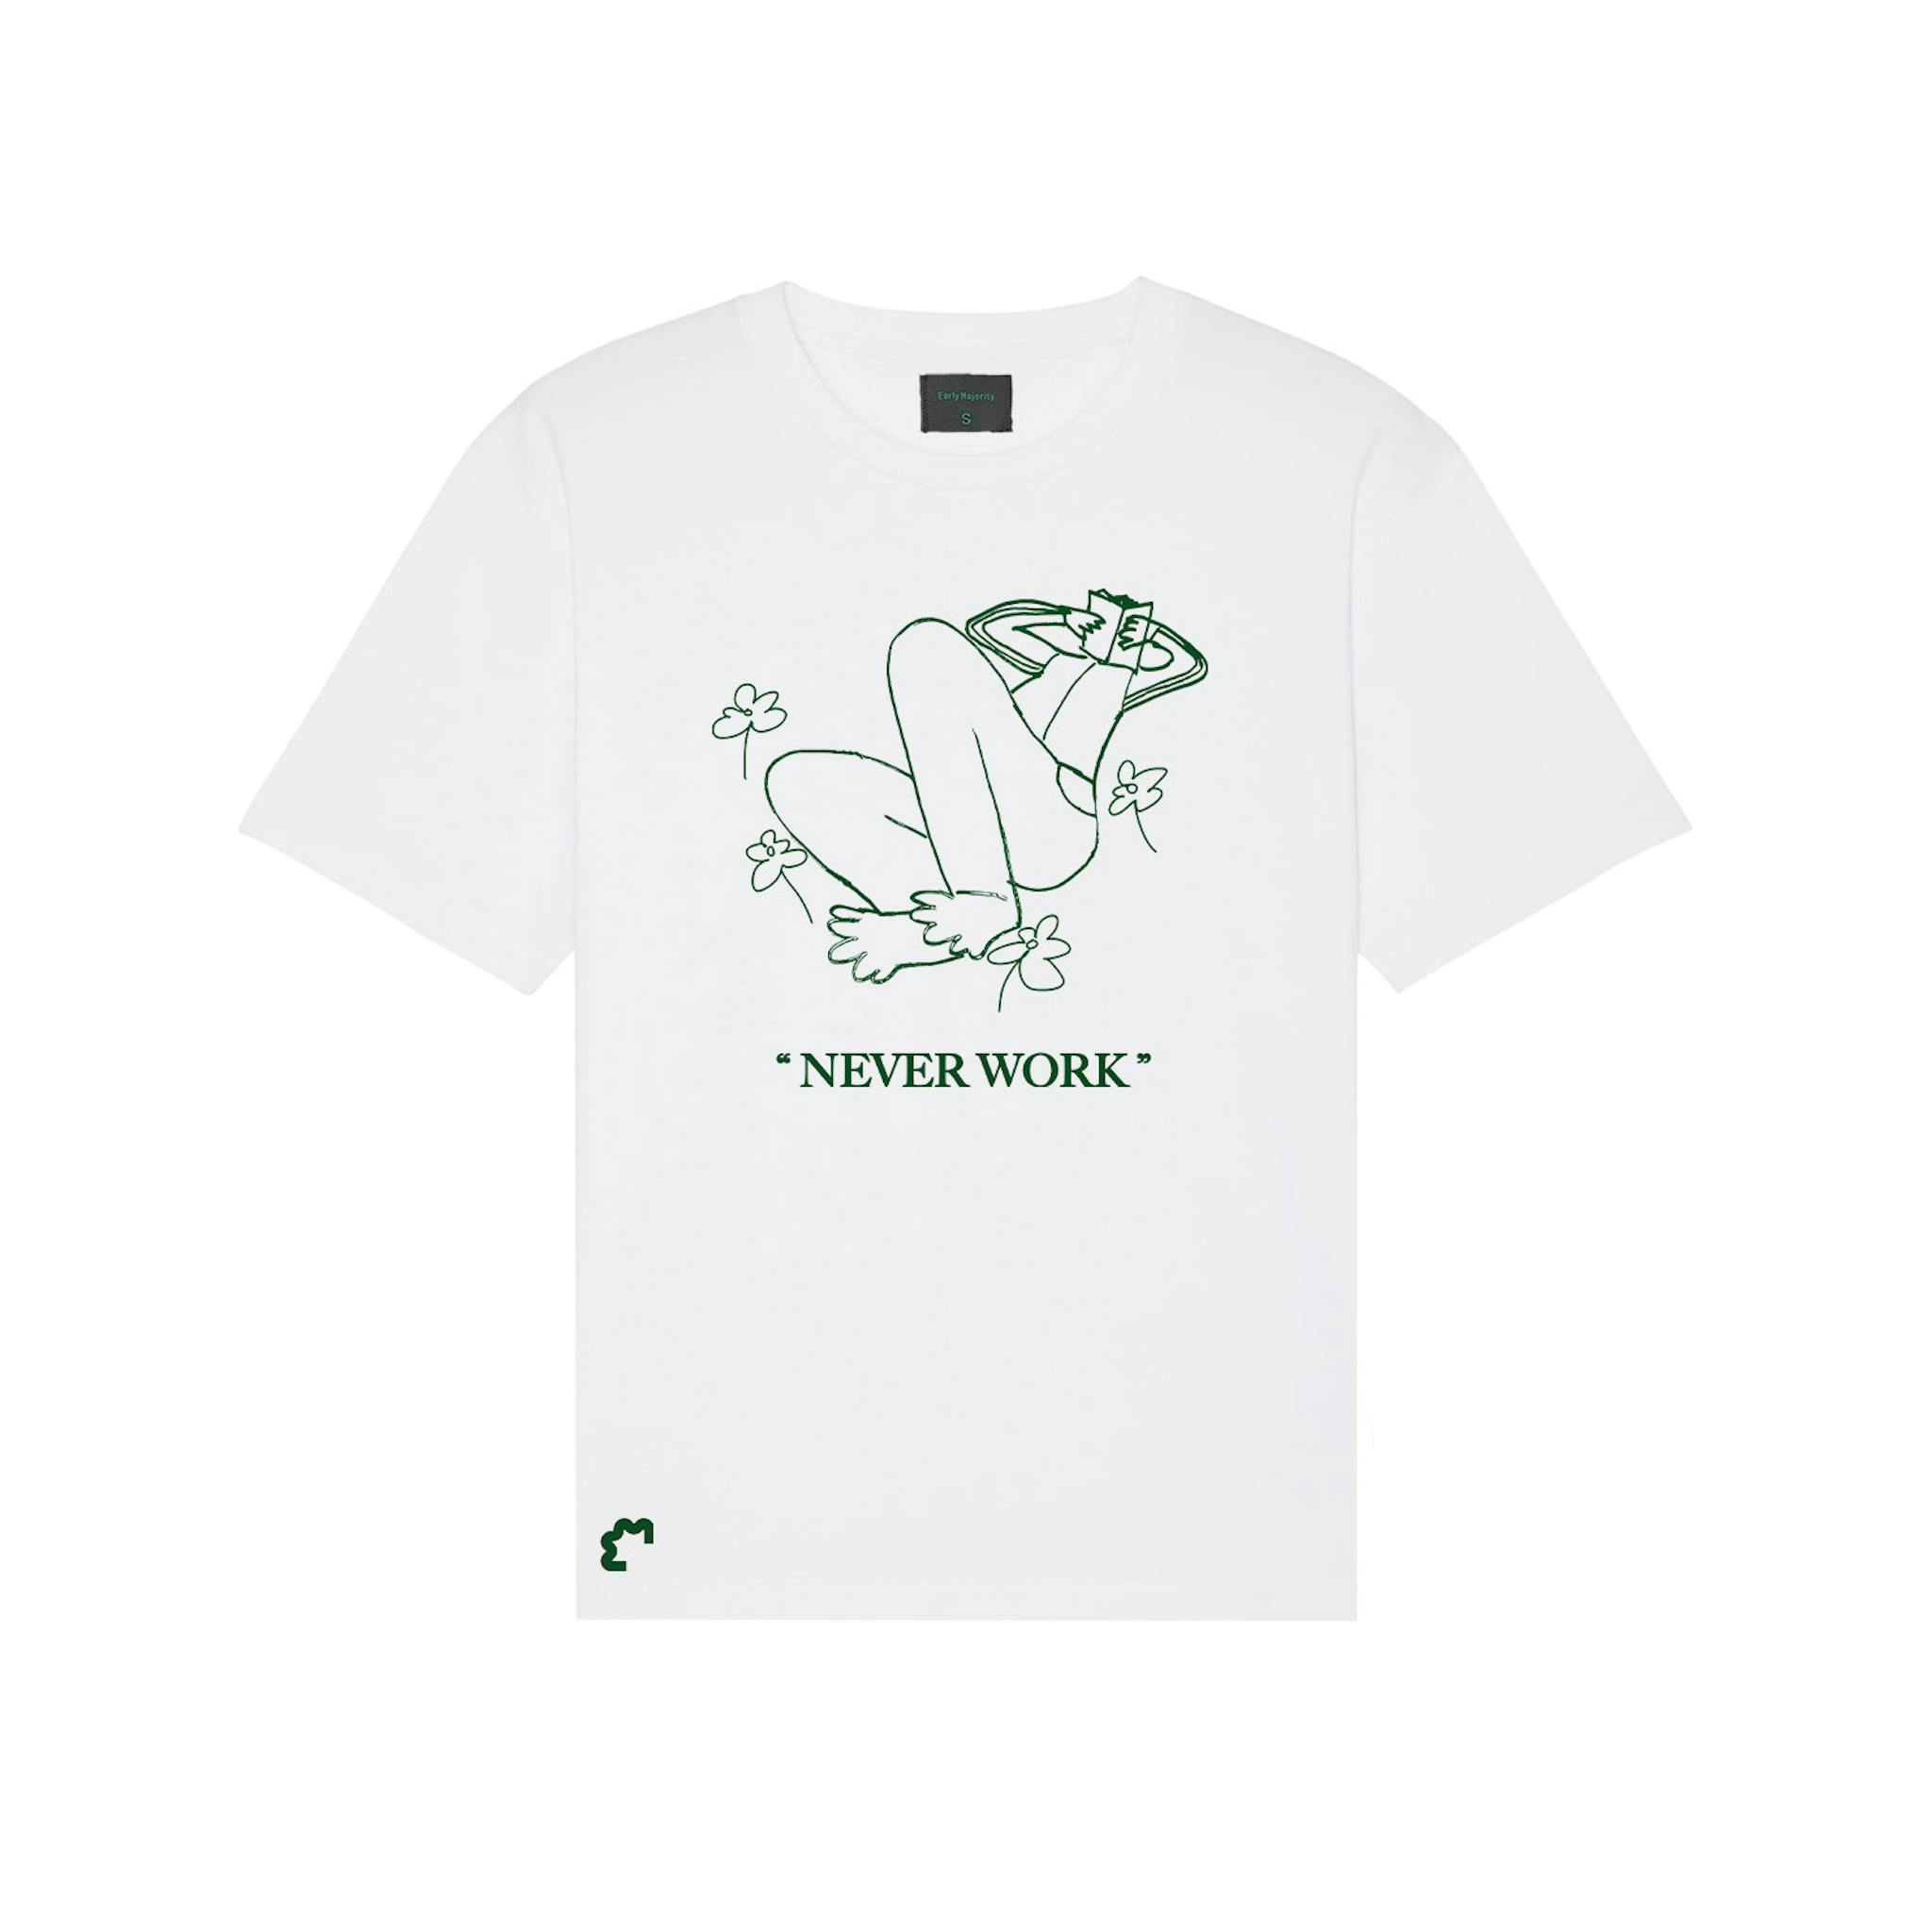 A white T-shirt with a green outline drawing of a figure lying back with legs up, surrounded by flowers, and the phrase "NEVER WORK" below it.